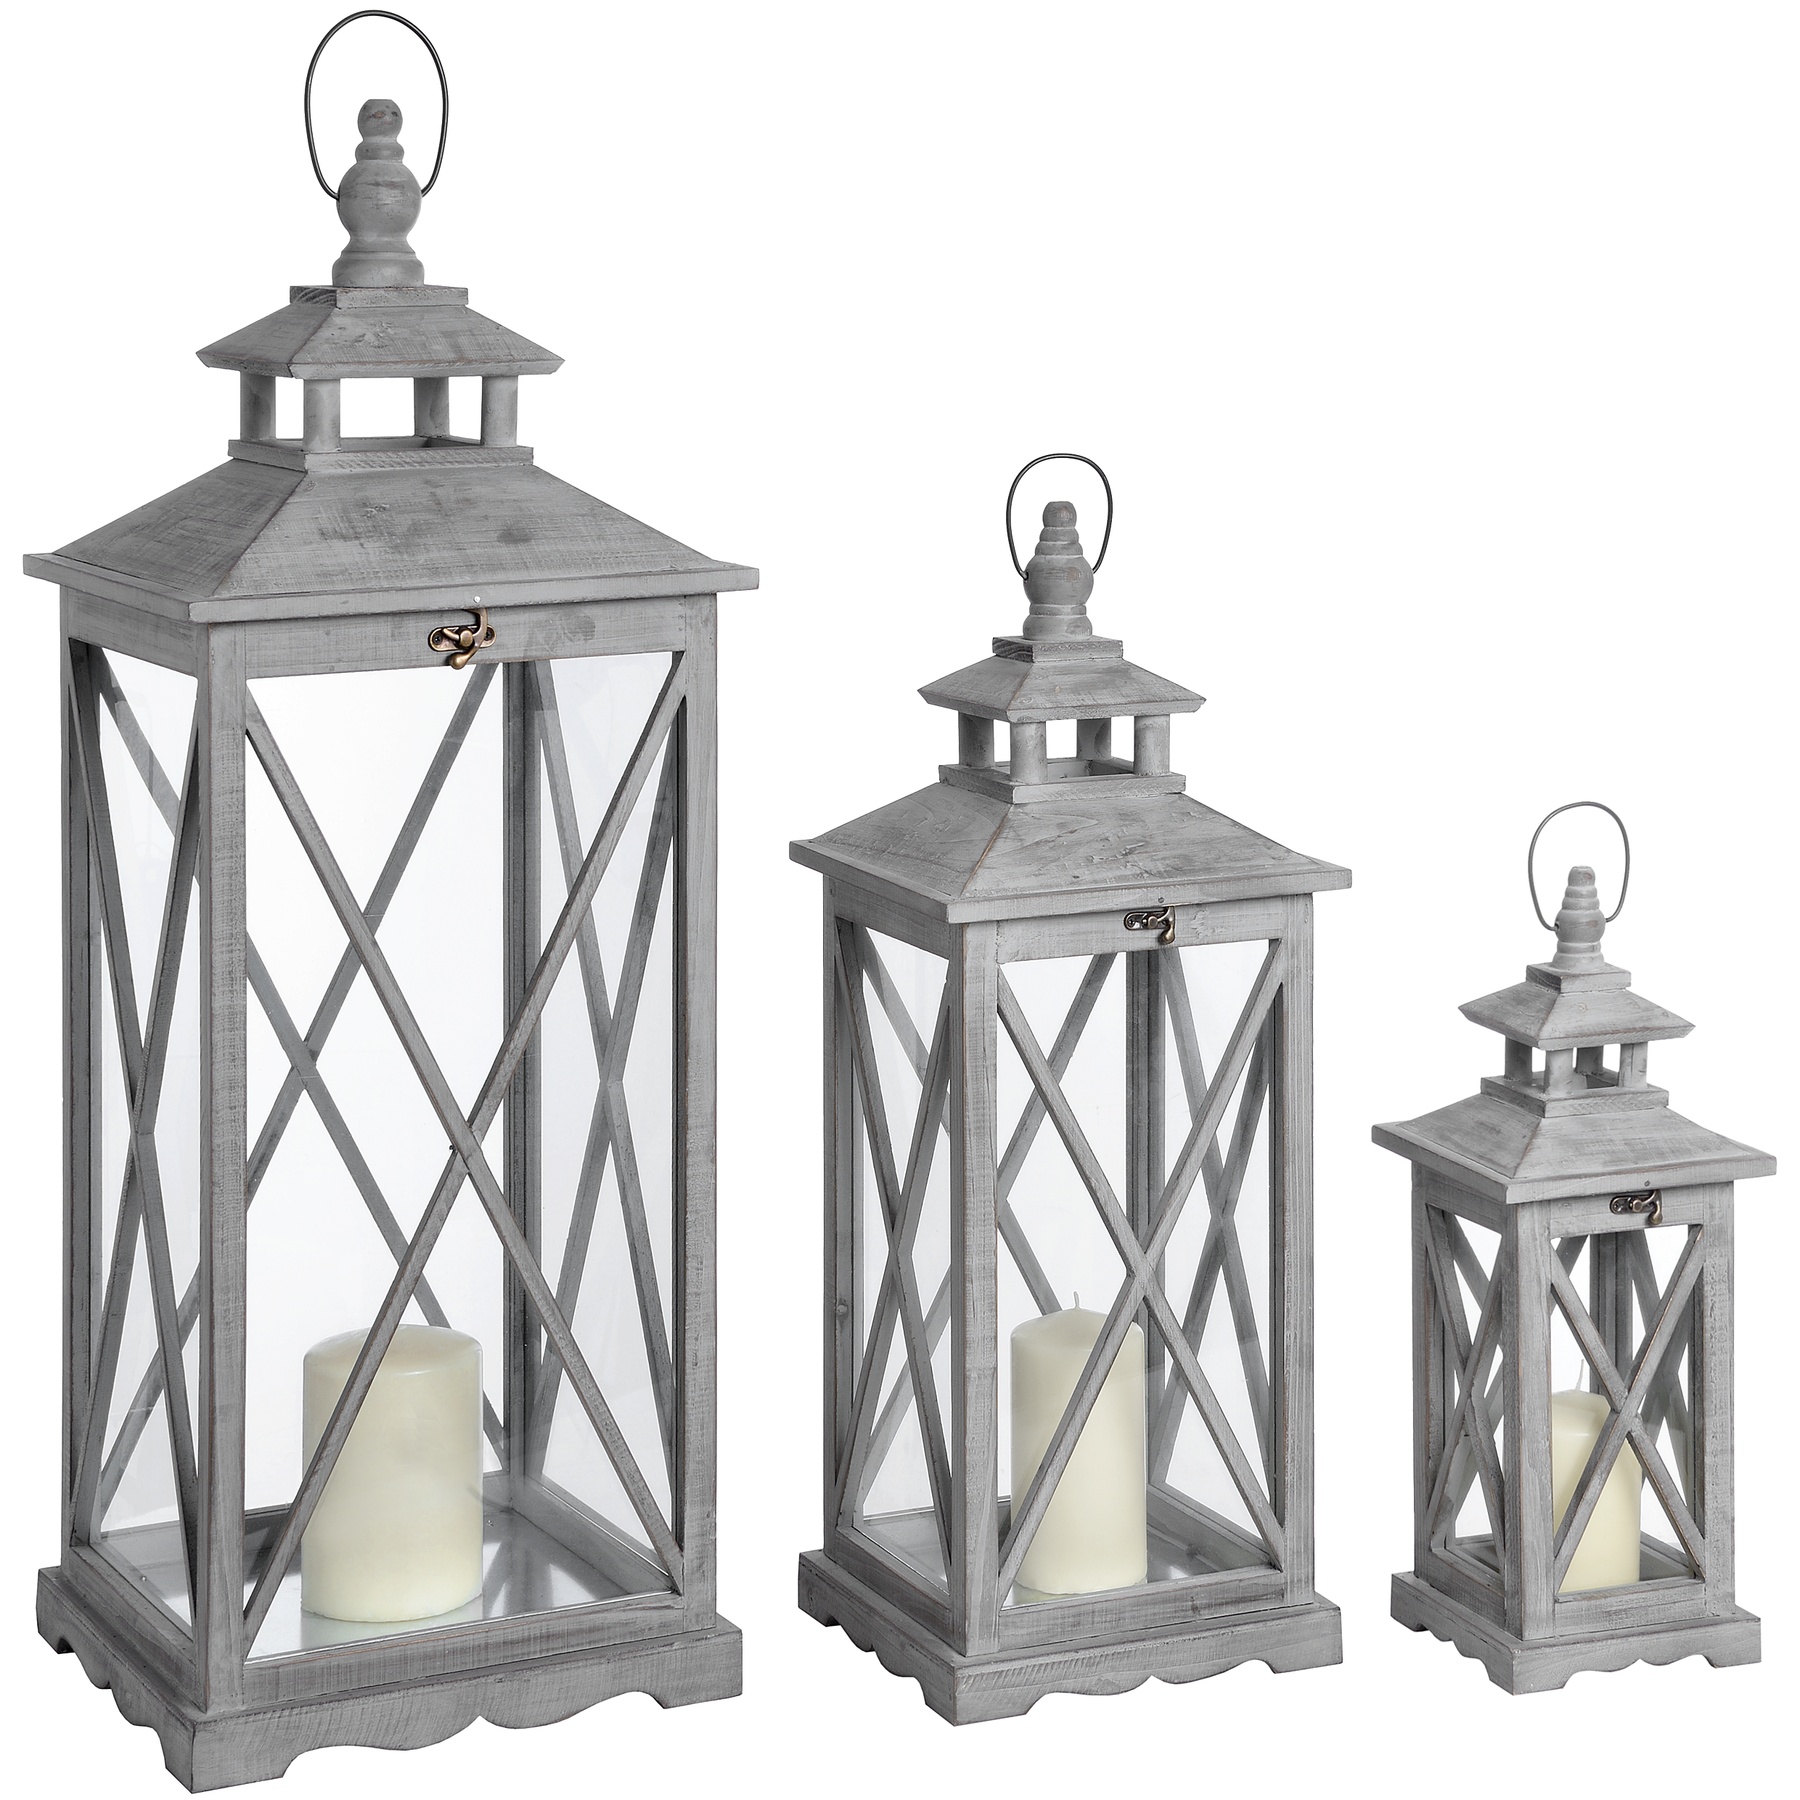 Set Of Three Wooden Lanterns With Traditional Cross Section - Image 1